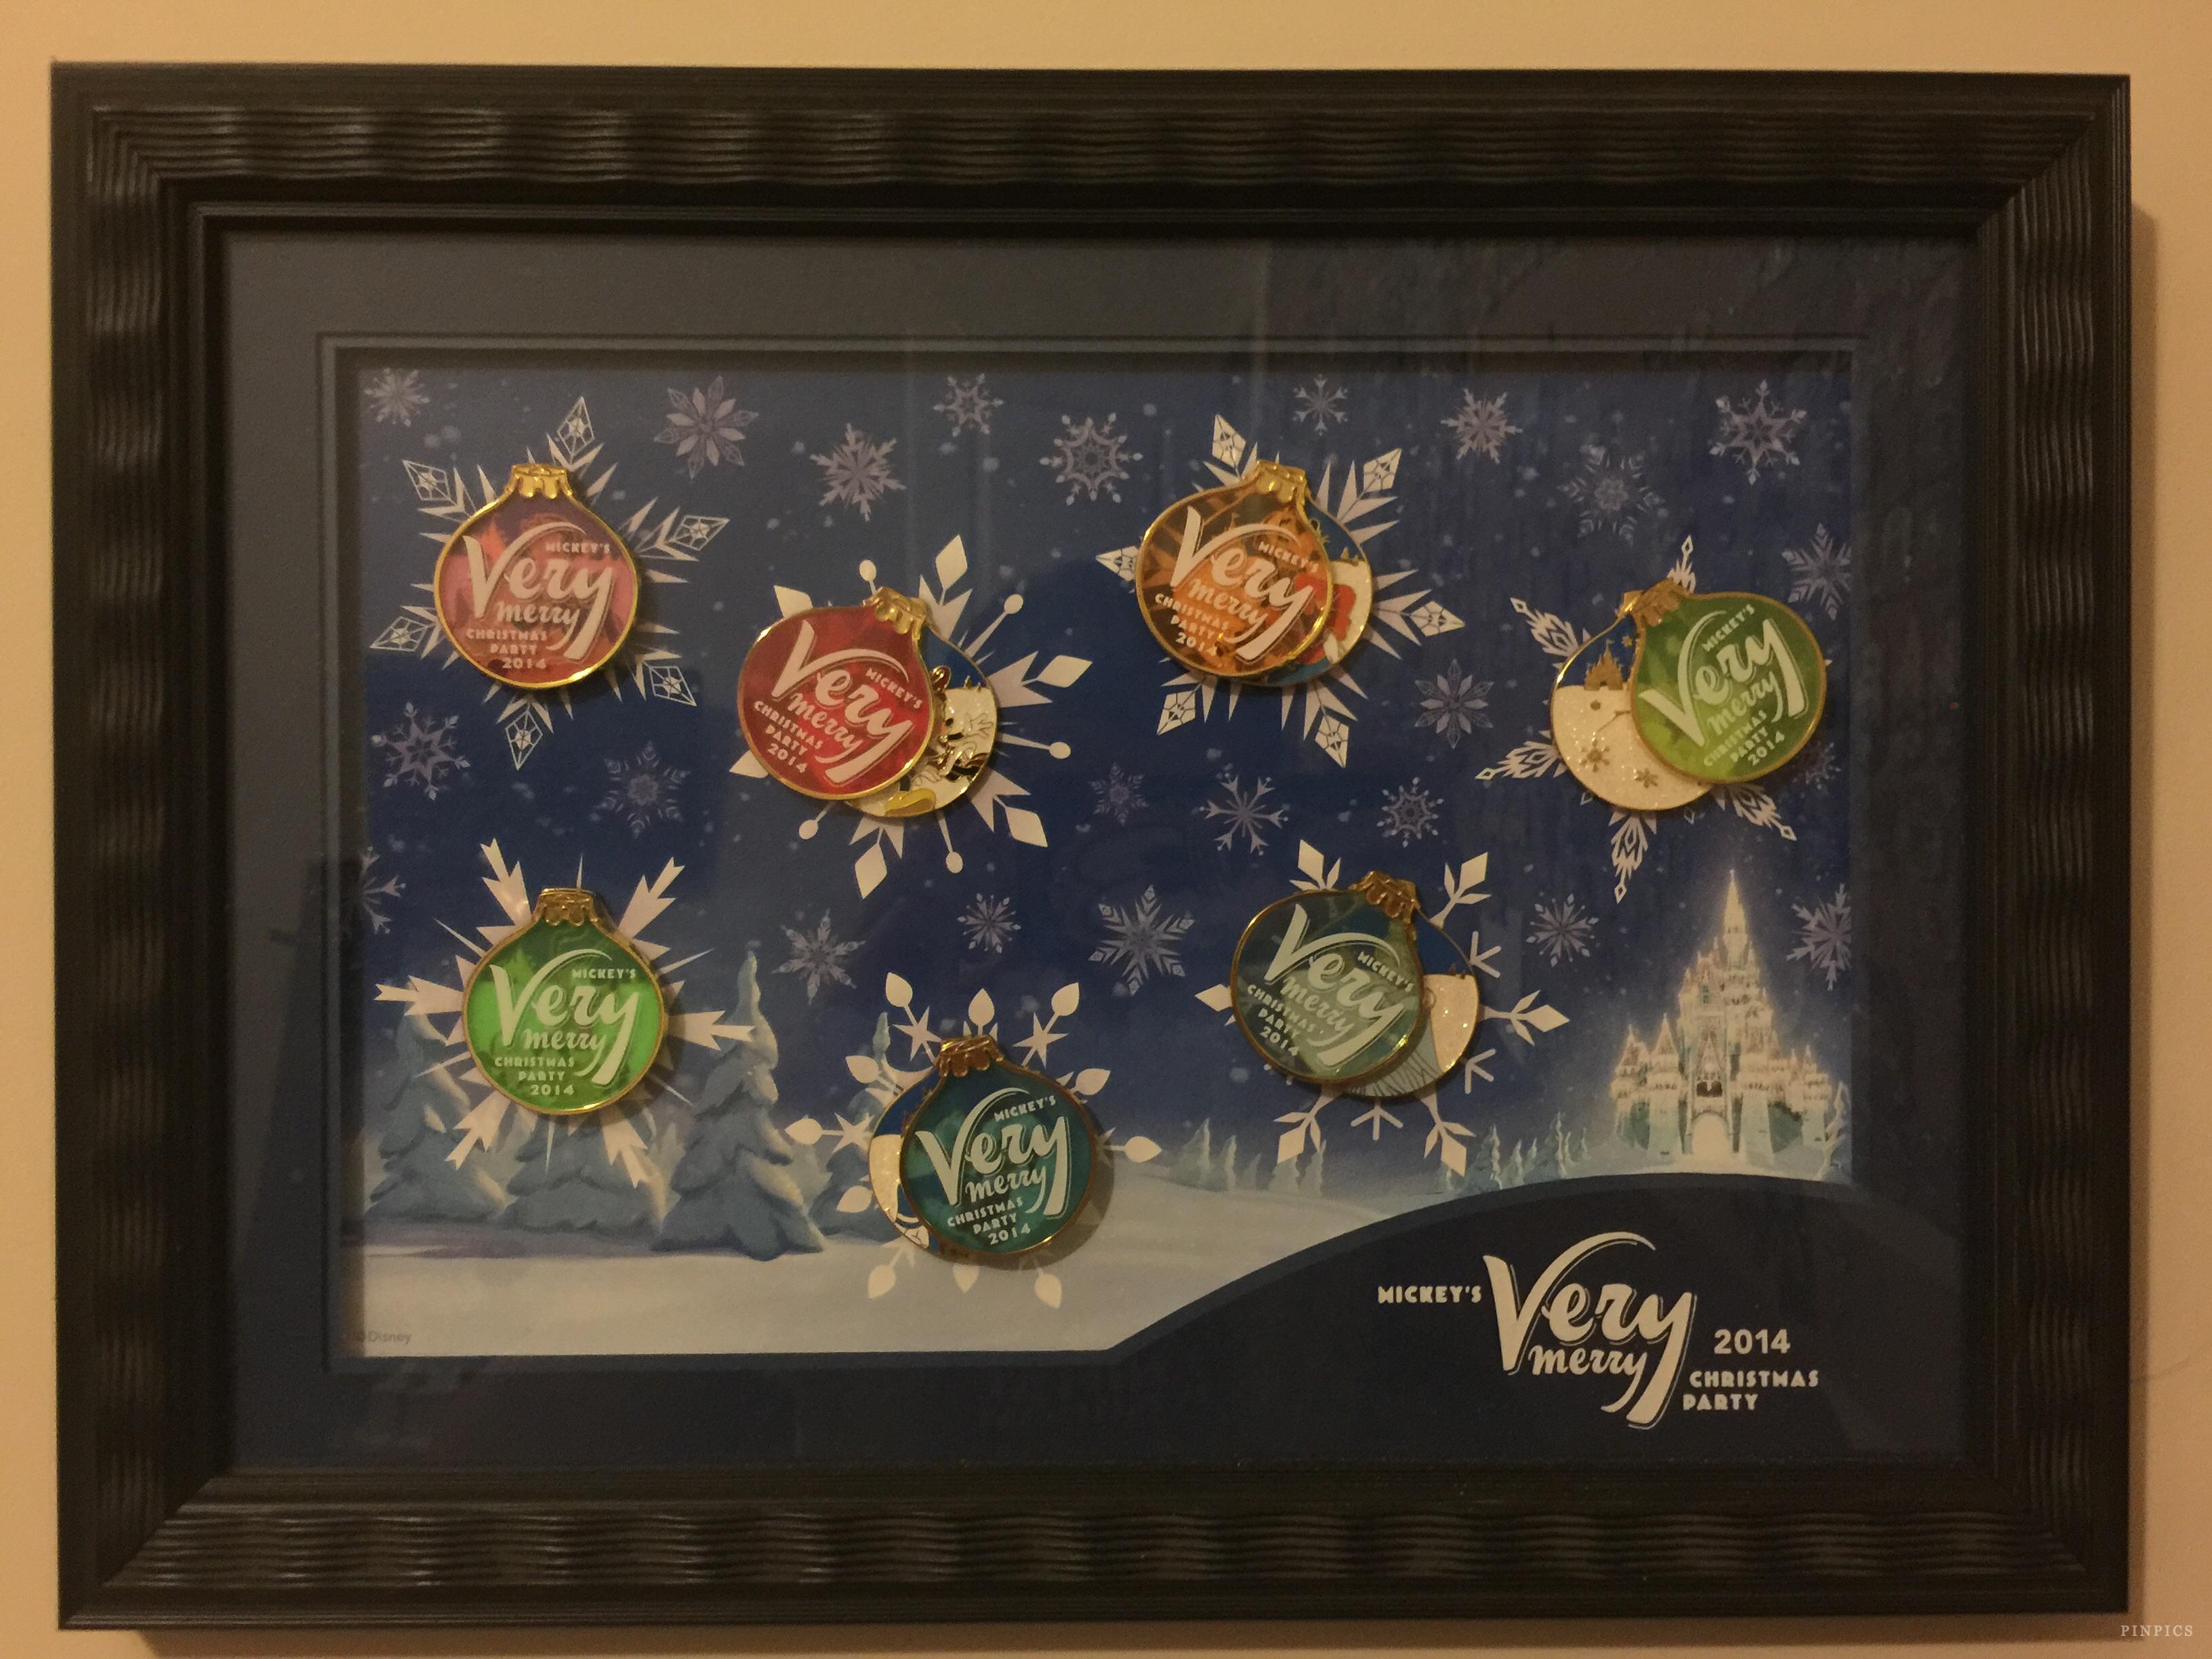 WDW - Mickey’s Very Merry Christmas Party 2014 - Framed Set